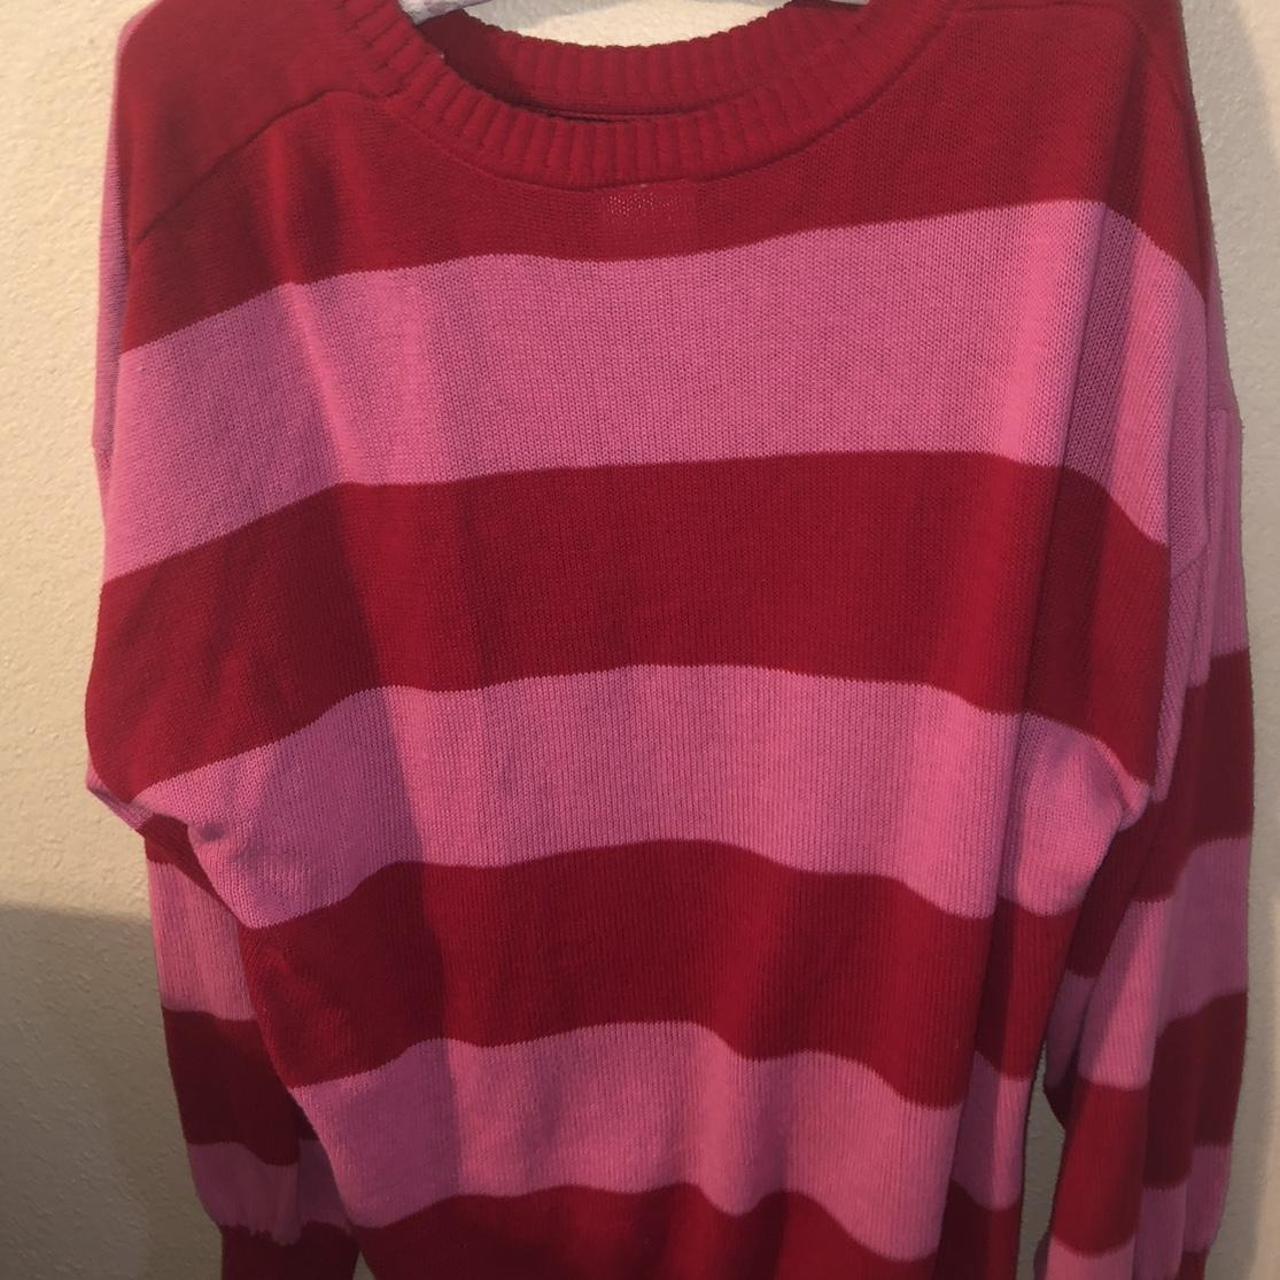 Sanrio Women's Red and Pink Jumper (2)